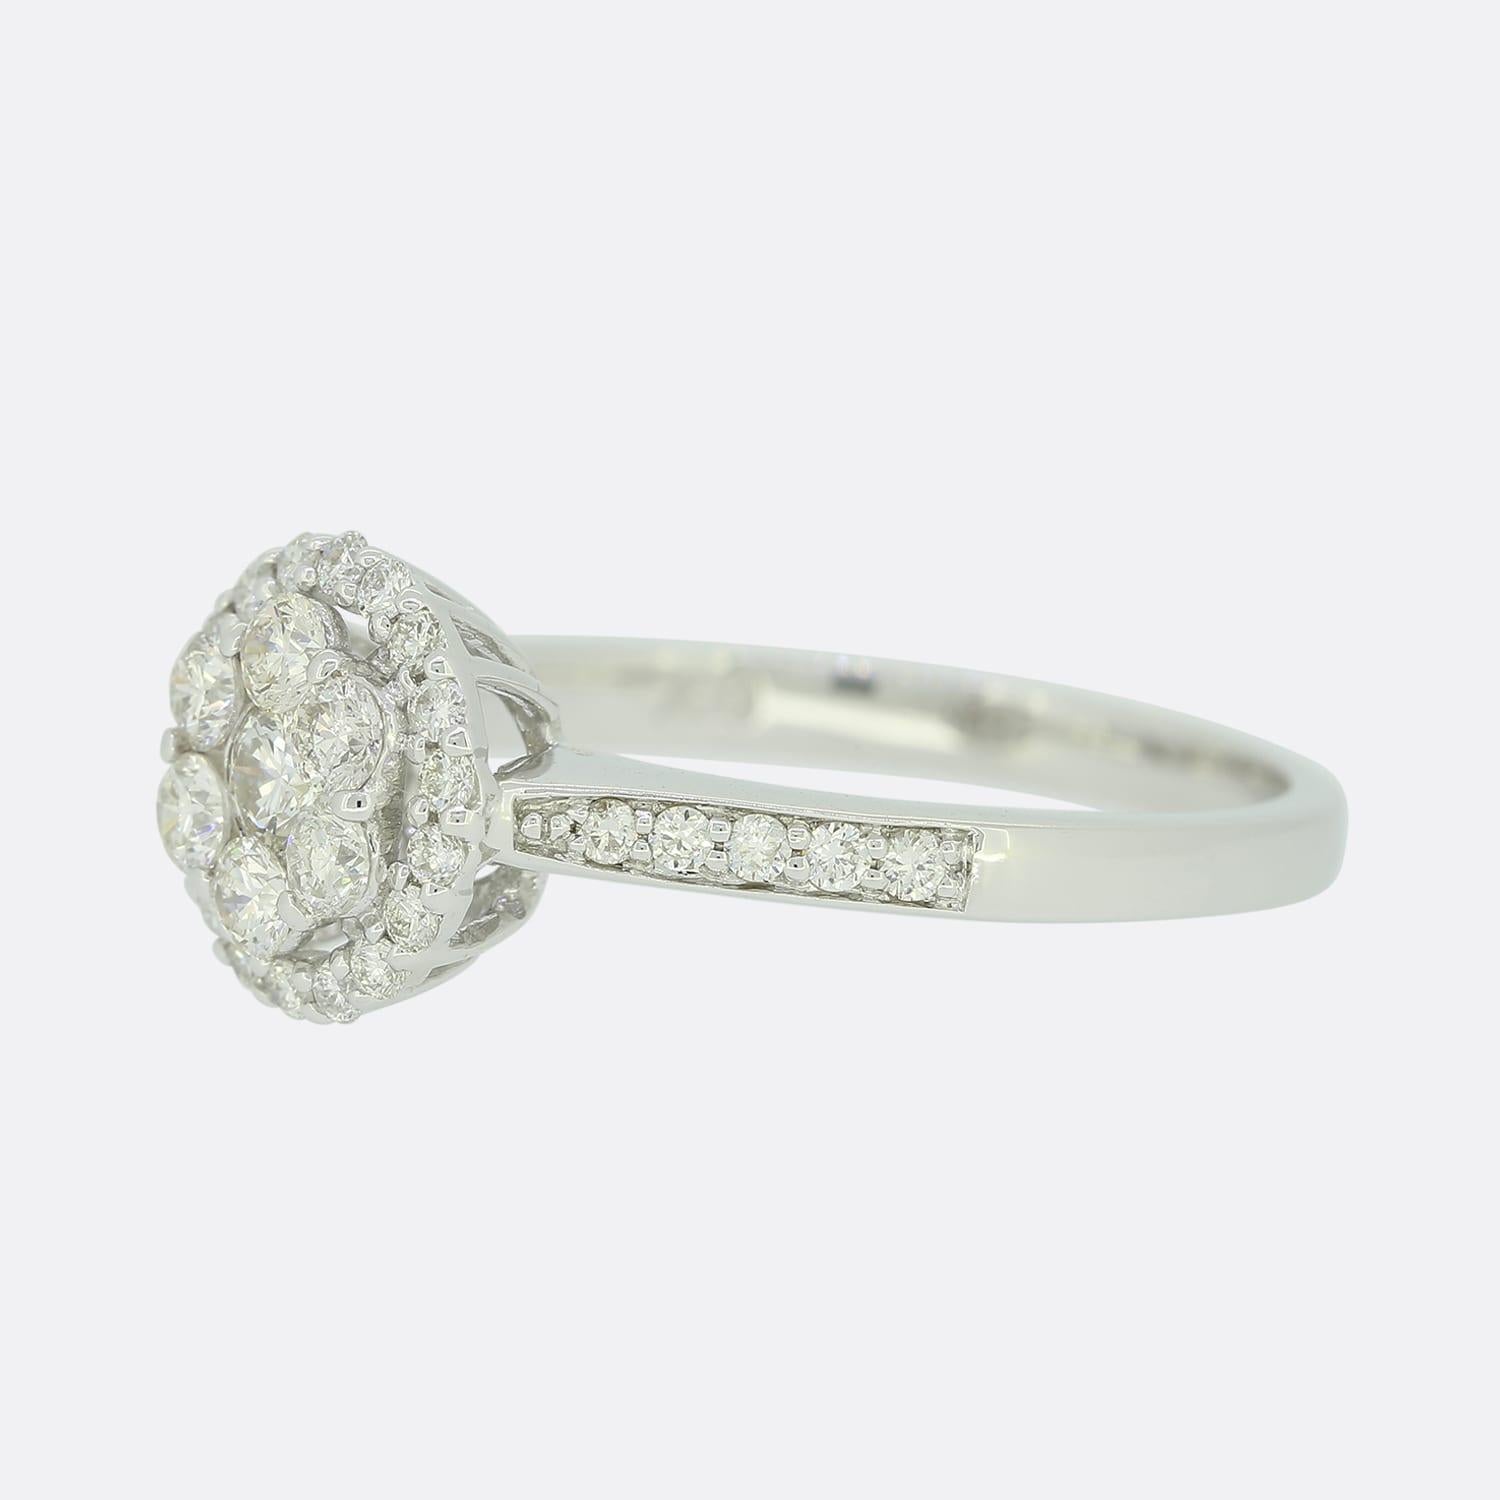 This is an 18ct white gold multi diamond round cluster ring. Featuring a single round diamond surrounded by six round diamonds set on a raised mount with a halo style circle encrusted with eighteen smaller round diamonds. This dazzling ring is